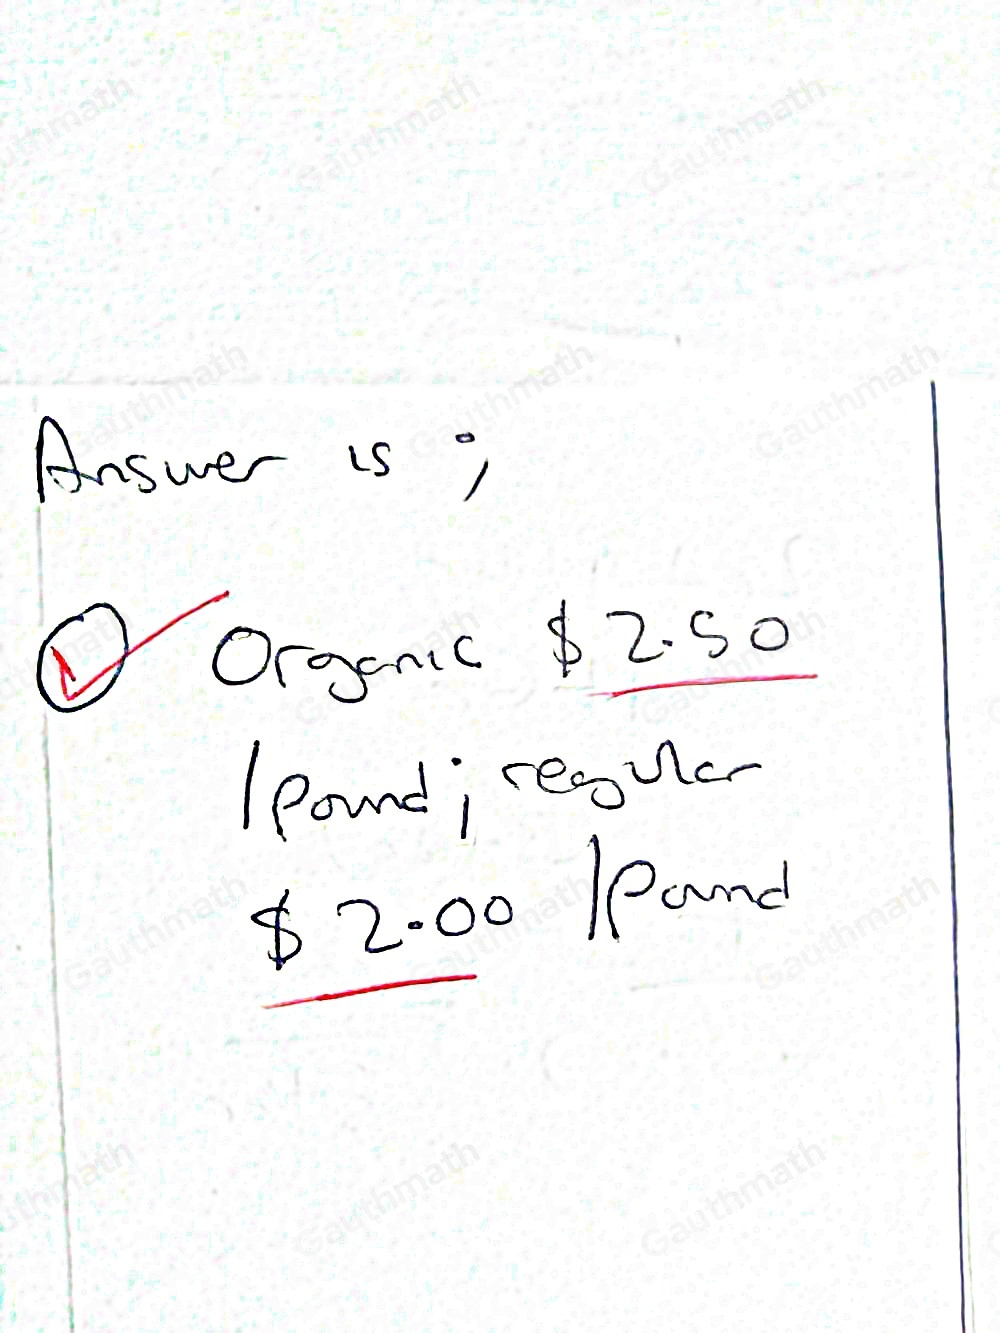 1. You buy 3 pounds of organic apples for $ 7.50. The graph shows the price for regular apples. What is the unit rate for each type of apple? I pounds organic $ 2.50/pound; regular $ 3.00/pound organic $ 0.40/pound; regular $ 0.50/pound organic $ 2.50/pound; regular $ 2.00/pound